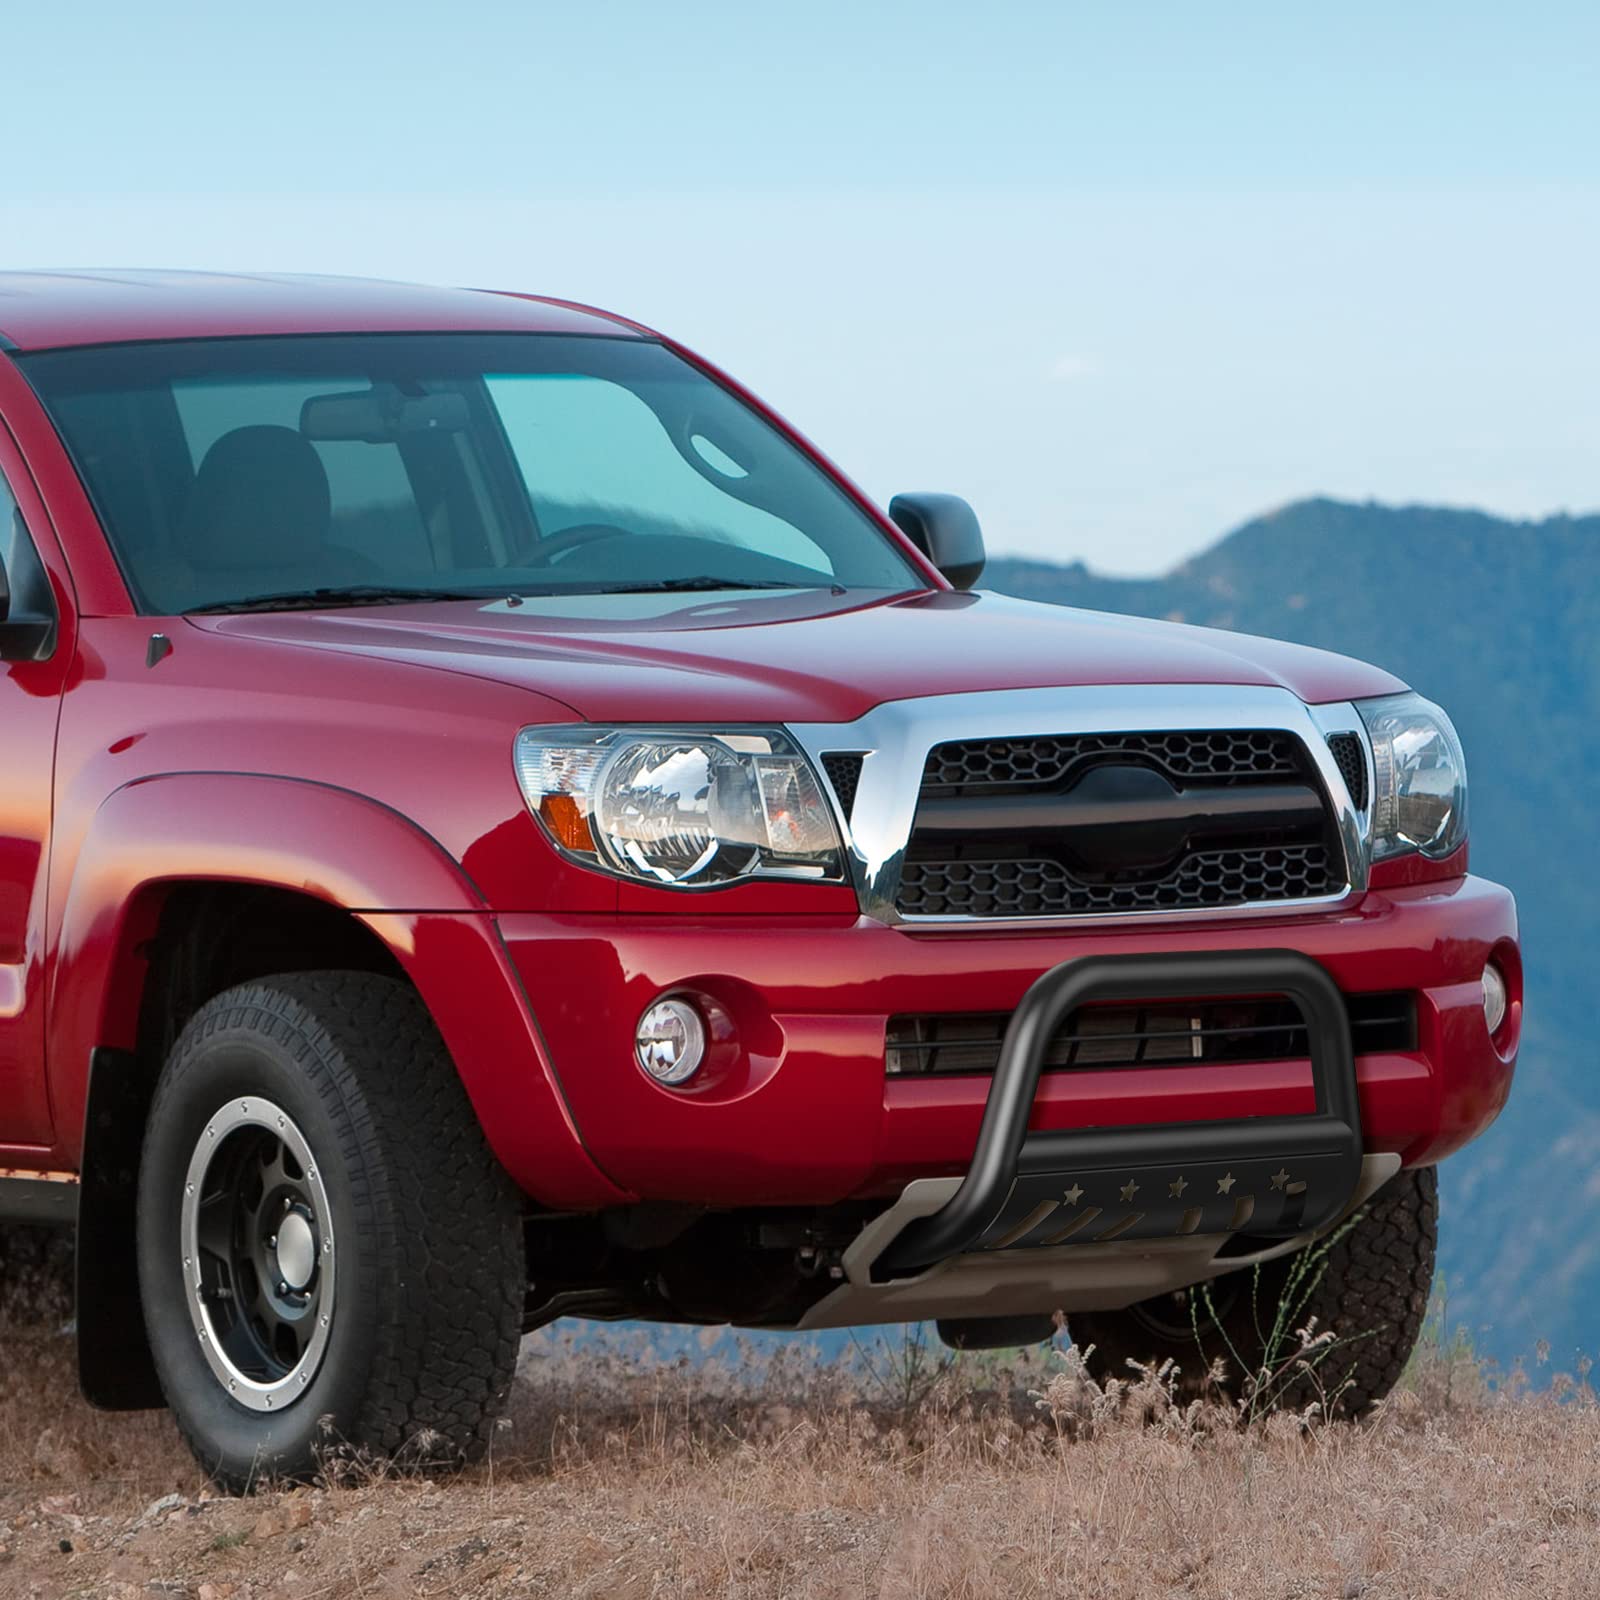 2005-2015 Tacoma Bull Bar with Skid Plate, Front Bumper Guard